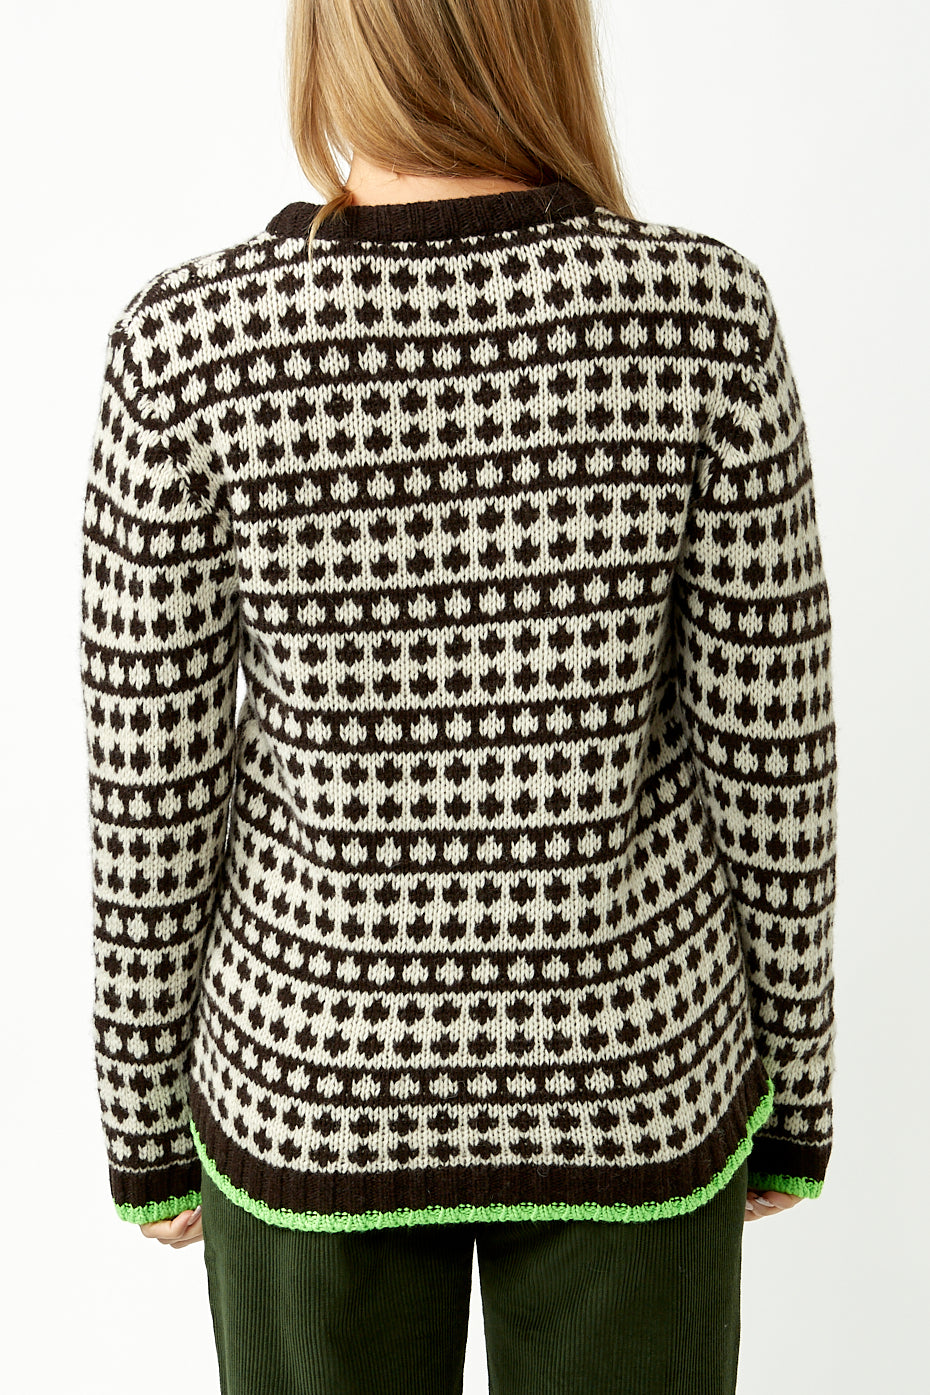 Black Coffee Winter White Recycled Kimilla Sweater